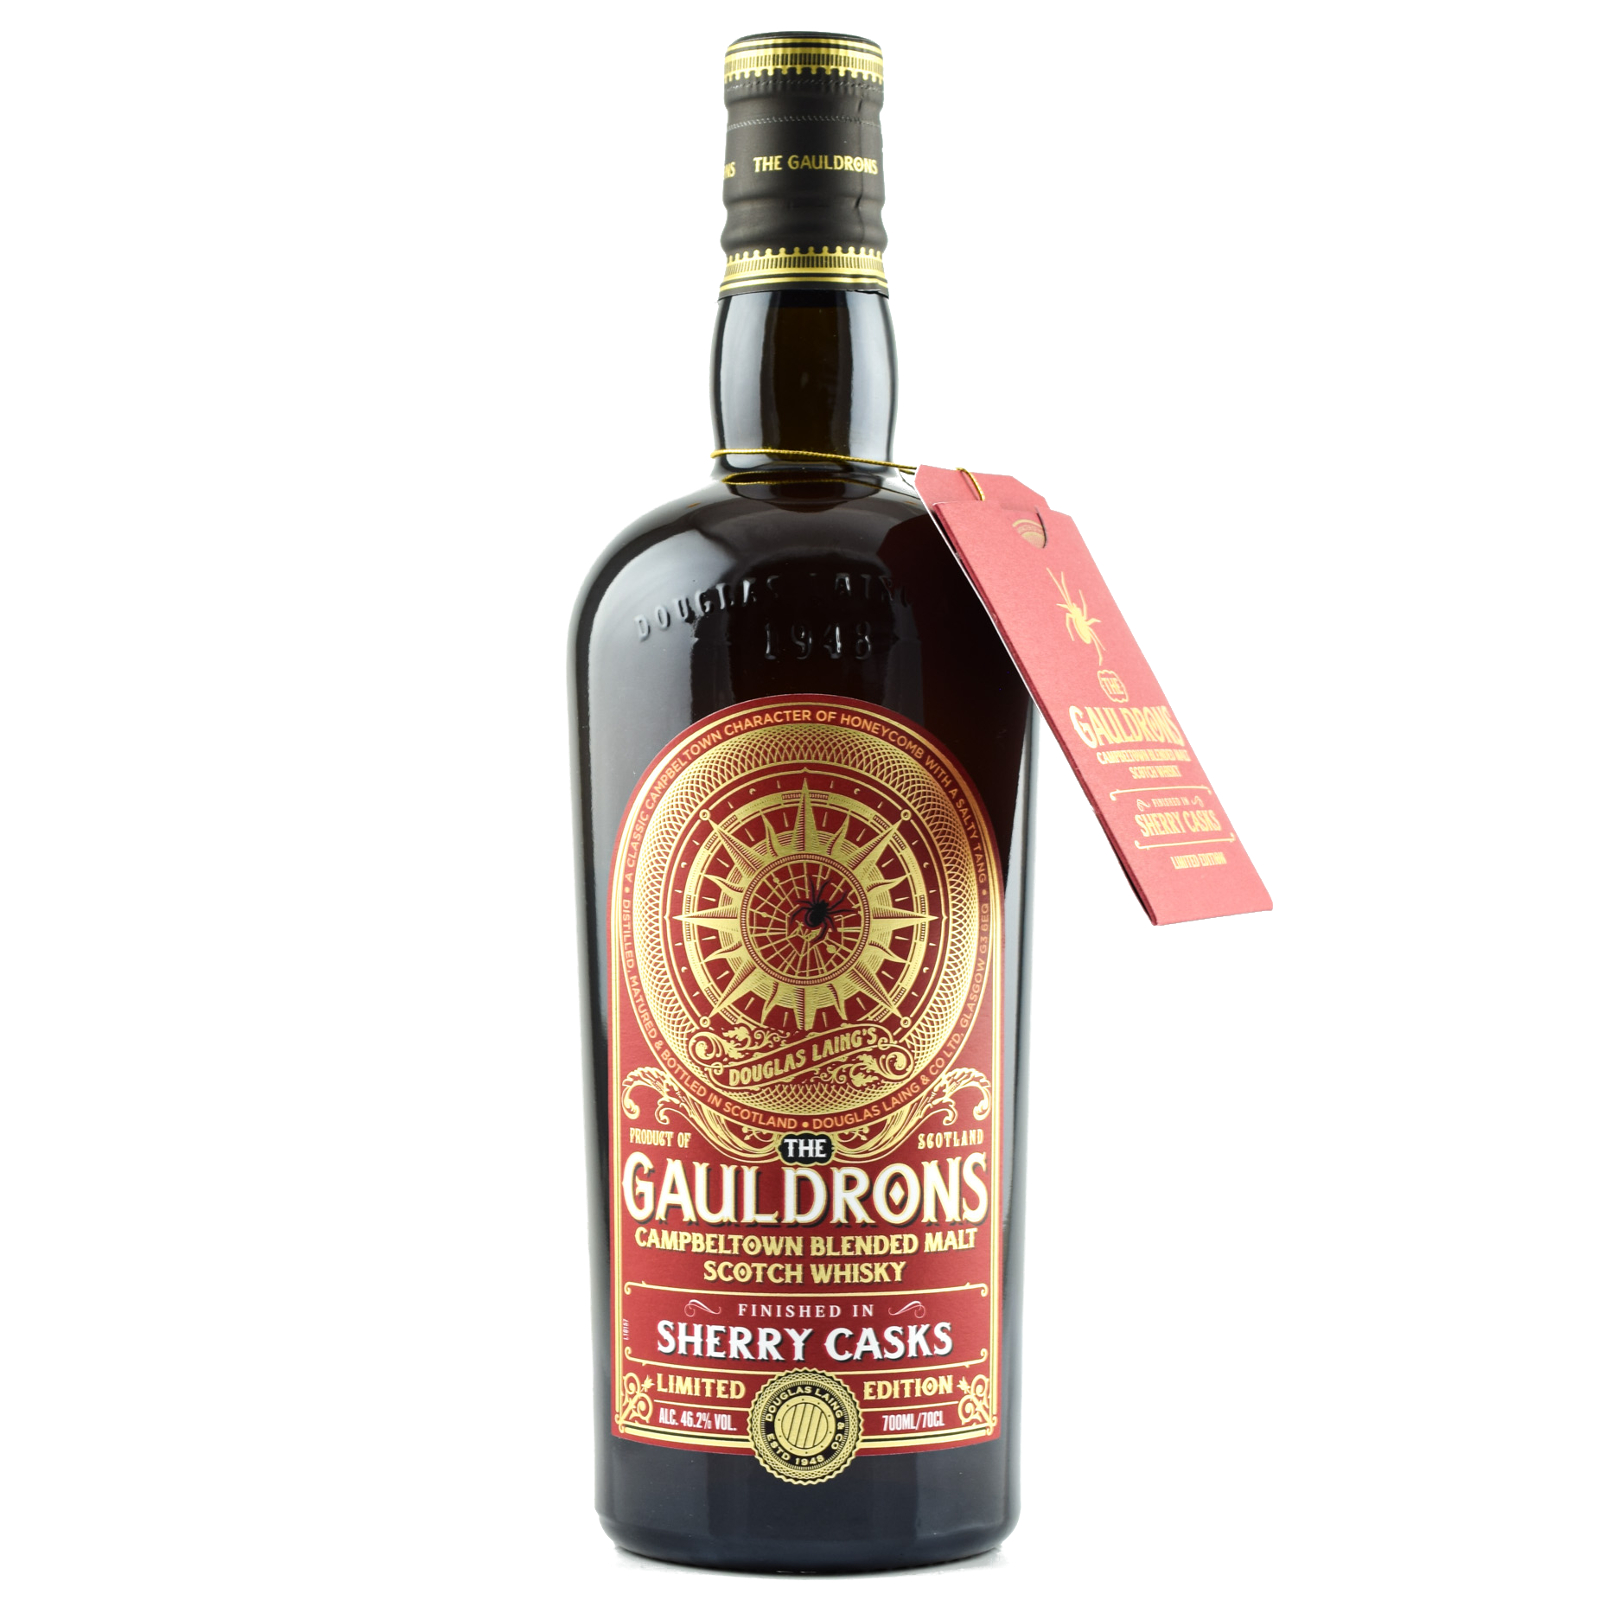 The Gauldrons Sherry Edition Malt Whisky – Campbeltown, Scotland